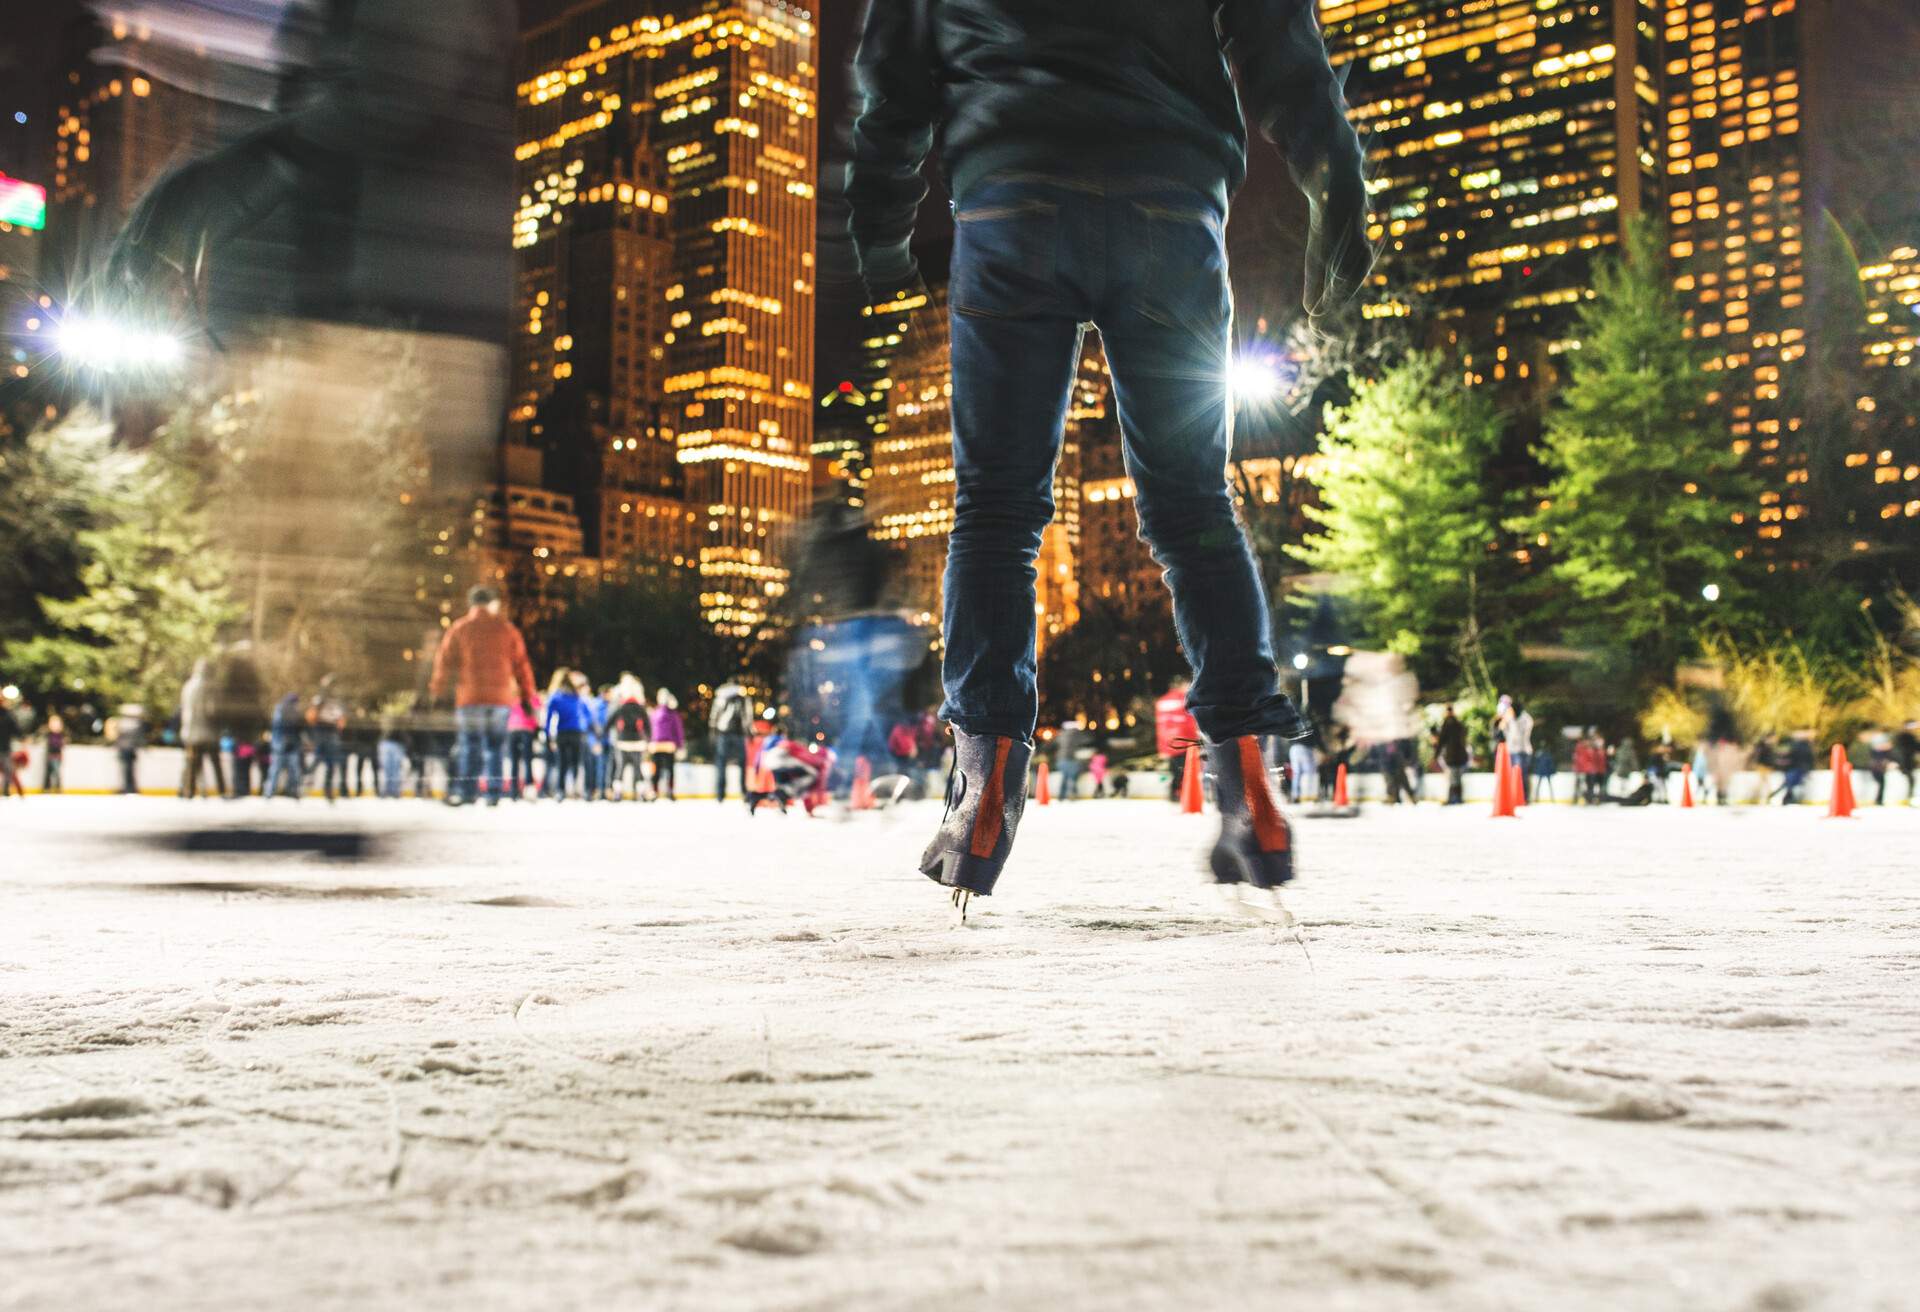 People skating on an ice rink surrounded by illuminated skyscrapers.